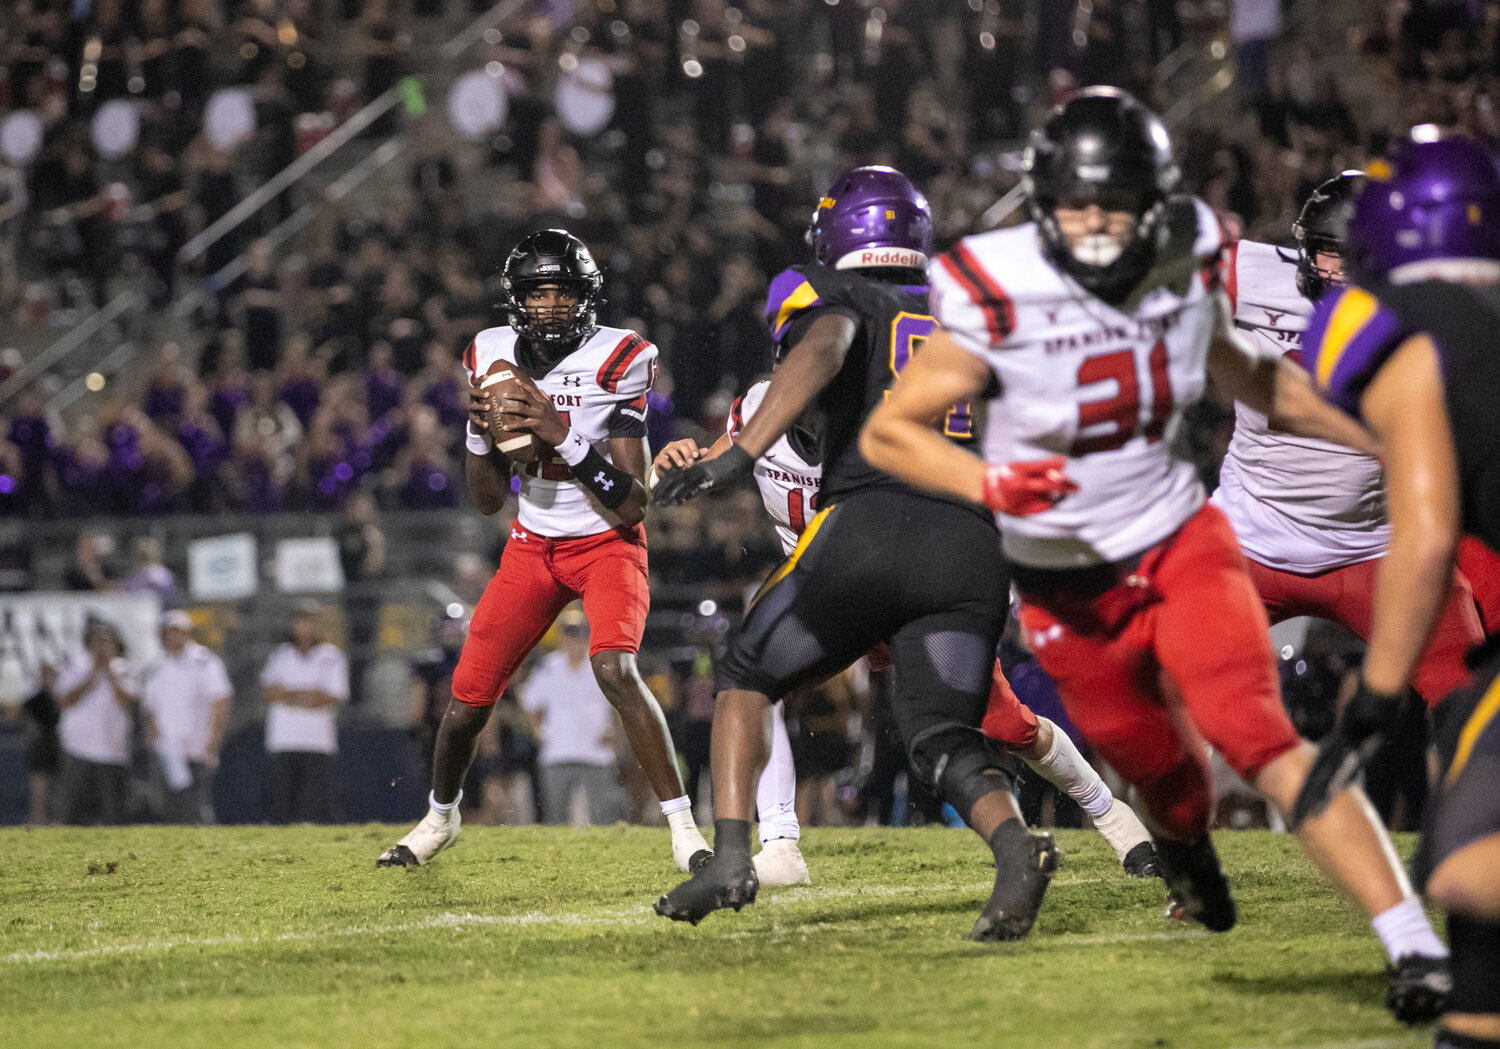 Toro sophomore quarterback Aaden Shamburger eyes the defense while senior Chandler Wilson (31) gets a release during Spanish Fort’s away rivalry game against the Daphne Trojans on Sept. 29 at Jubilee Stadium. Shamburger finished the season with 1,270 passing yards where 143 of them, and 3 of the quarterback’s 12 touchdowns, went to Wilson.